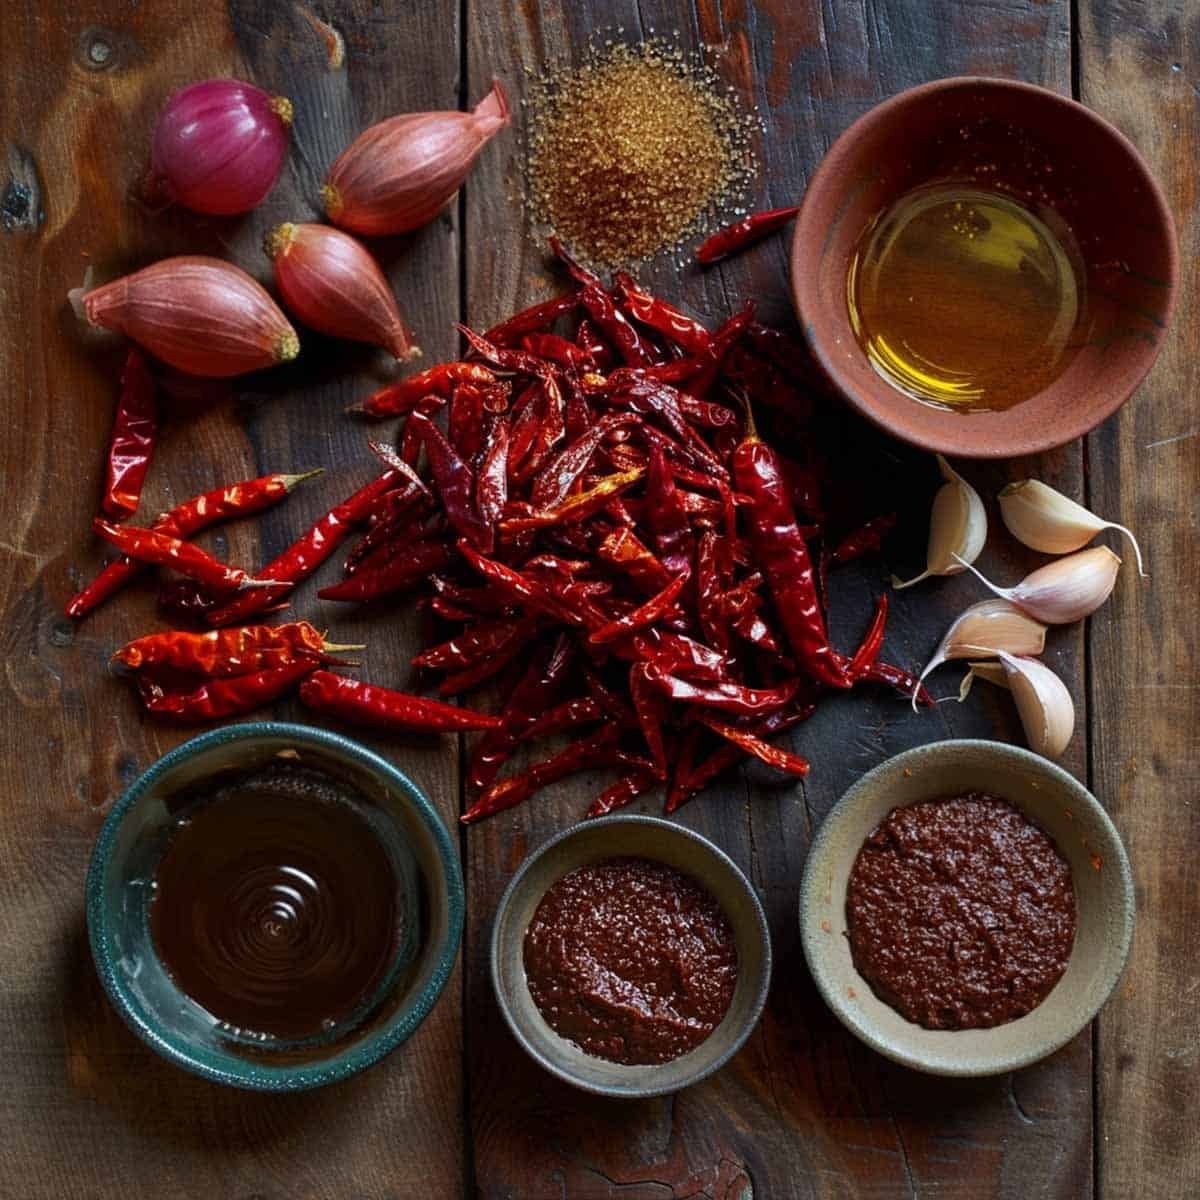 Ingredients for Nam Prik Pao aThai Chili Paste are displayed on a rustic table: vibrant chilies, shallots, garlic, tamarind, shrimp paste, palm sugar, and fish sauce.